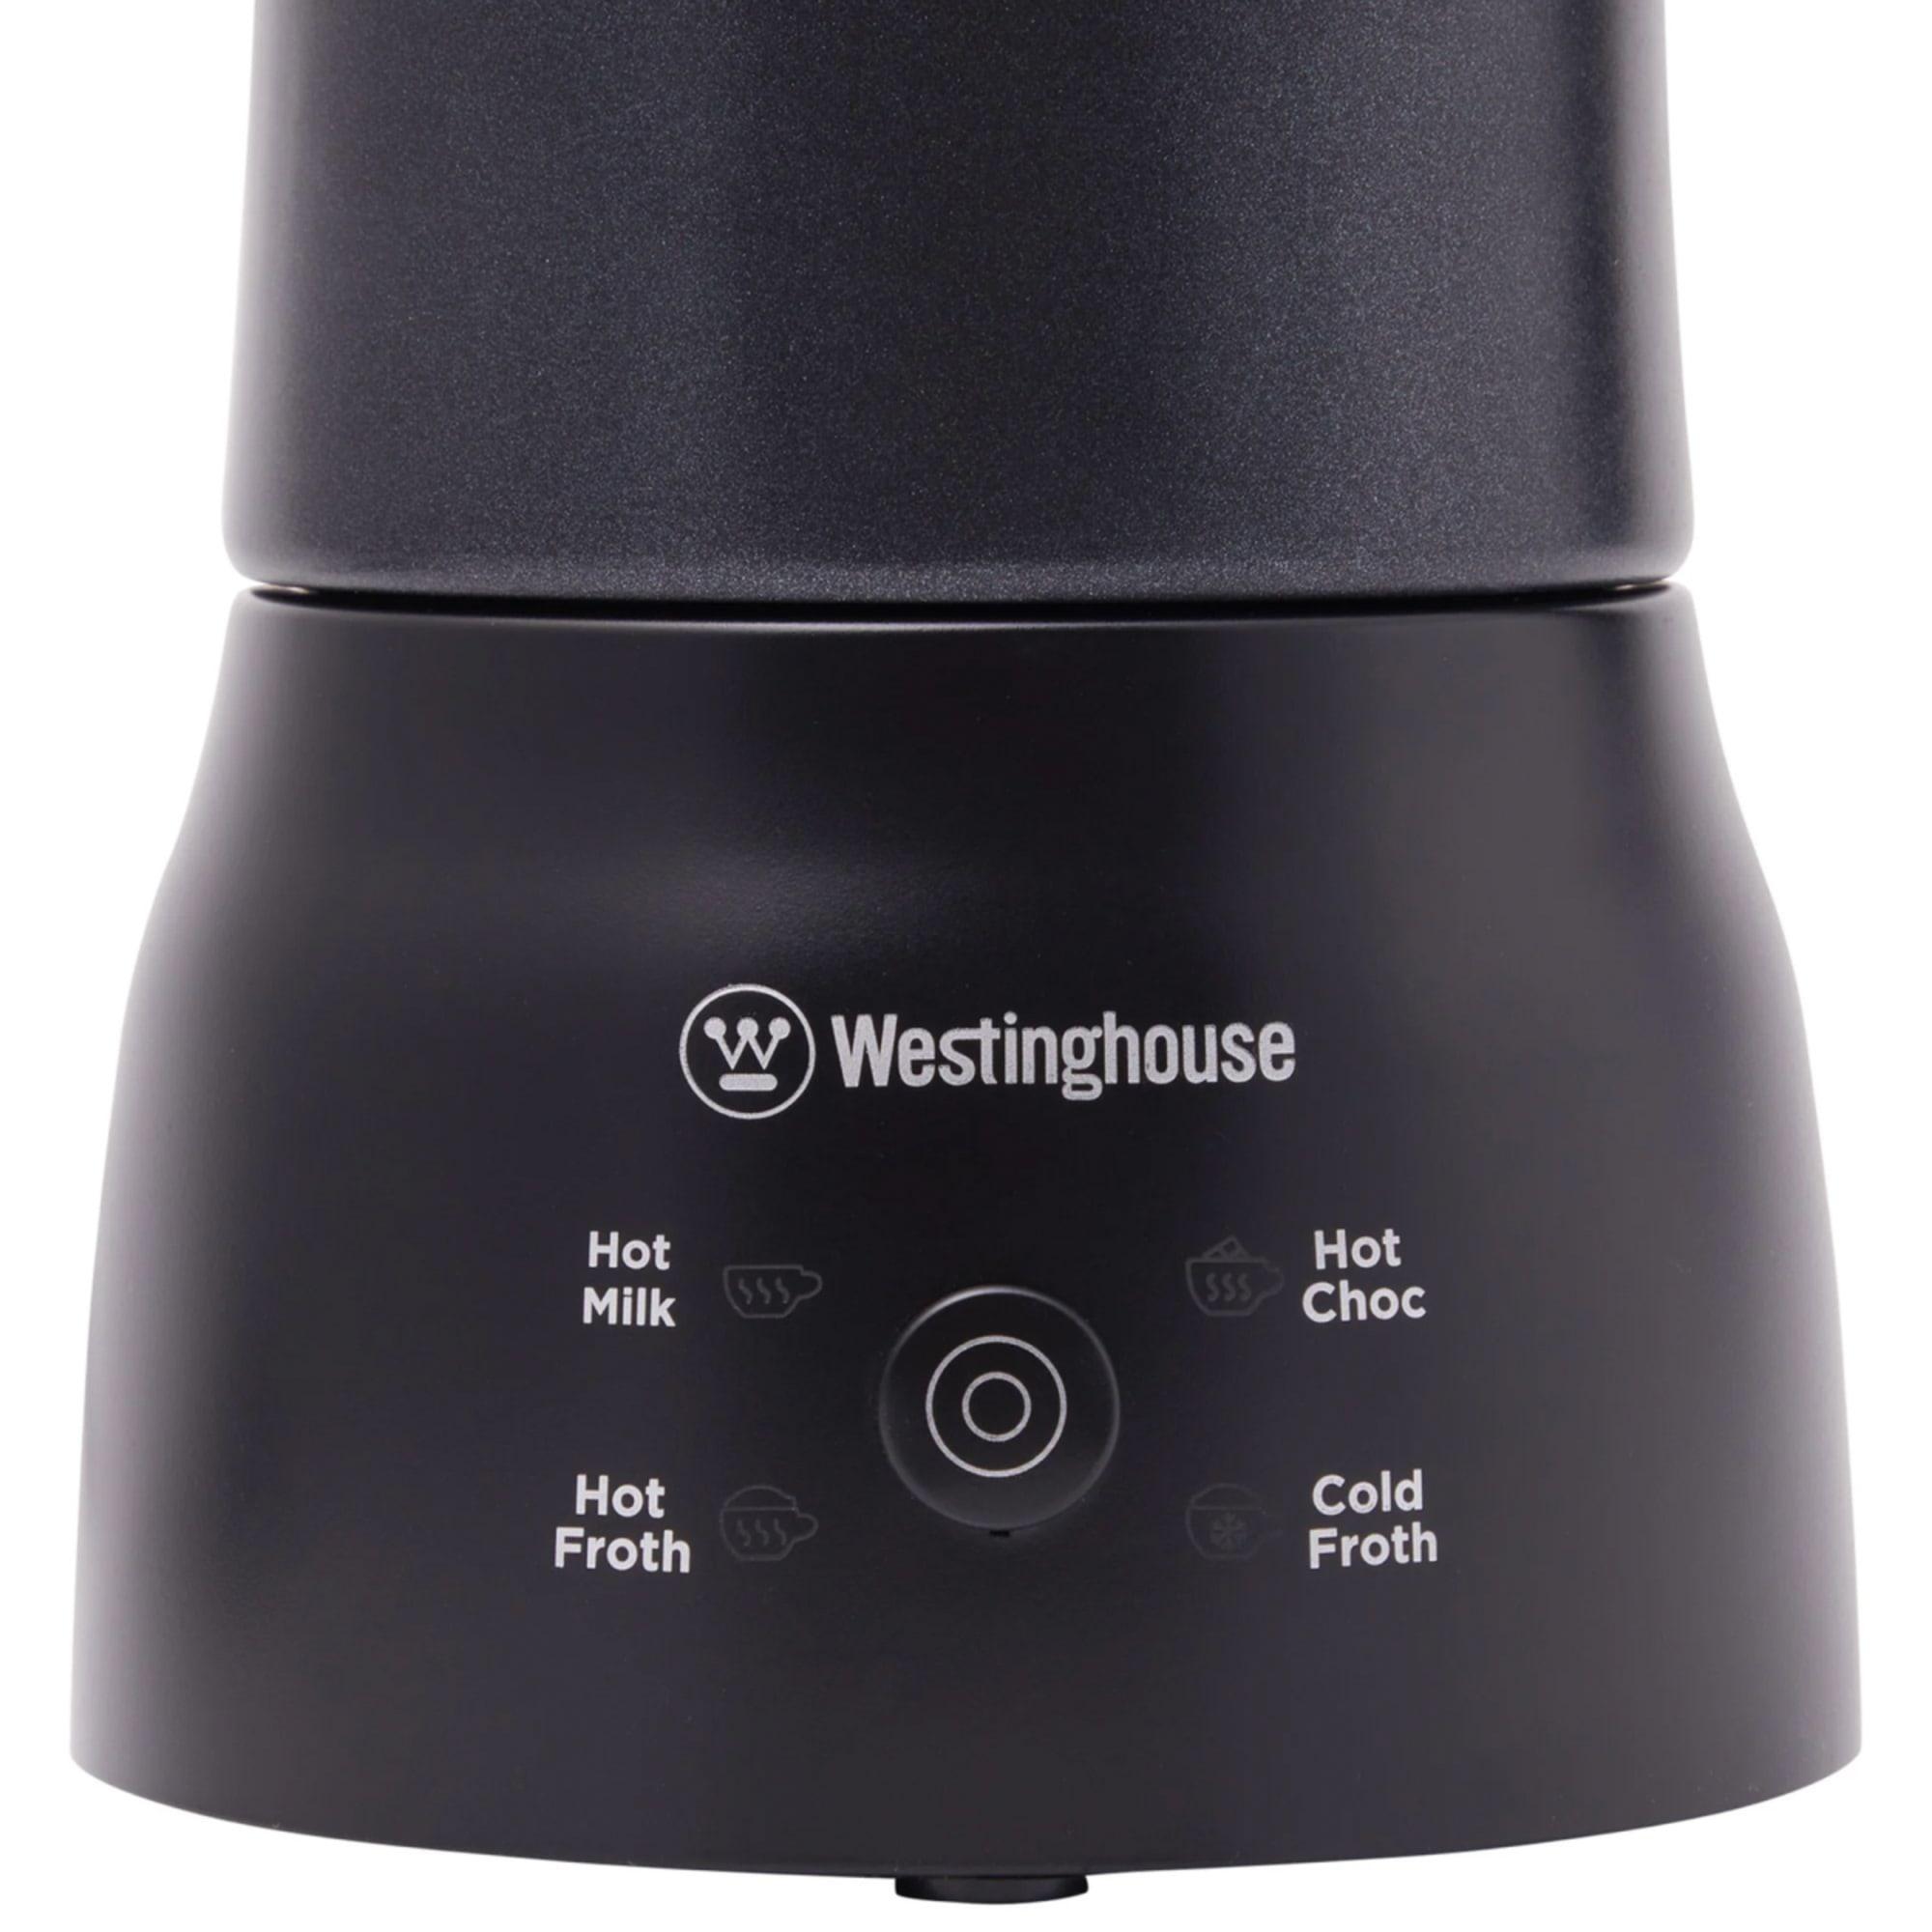 Westinghouse Milk Frother Black Image 4